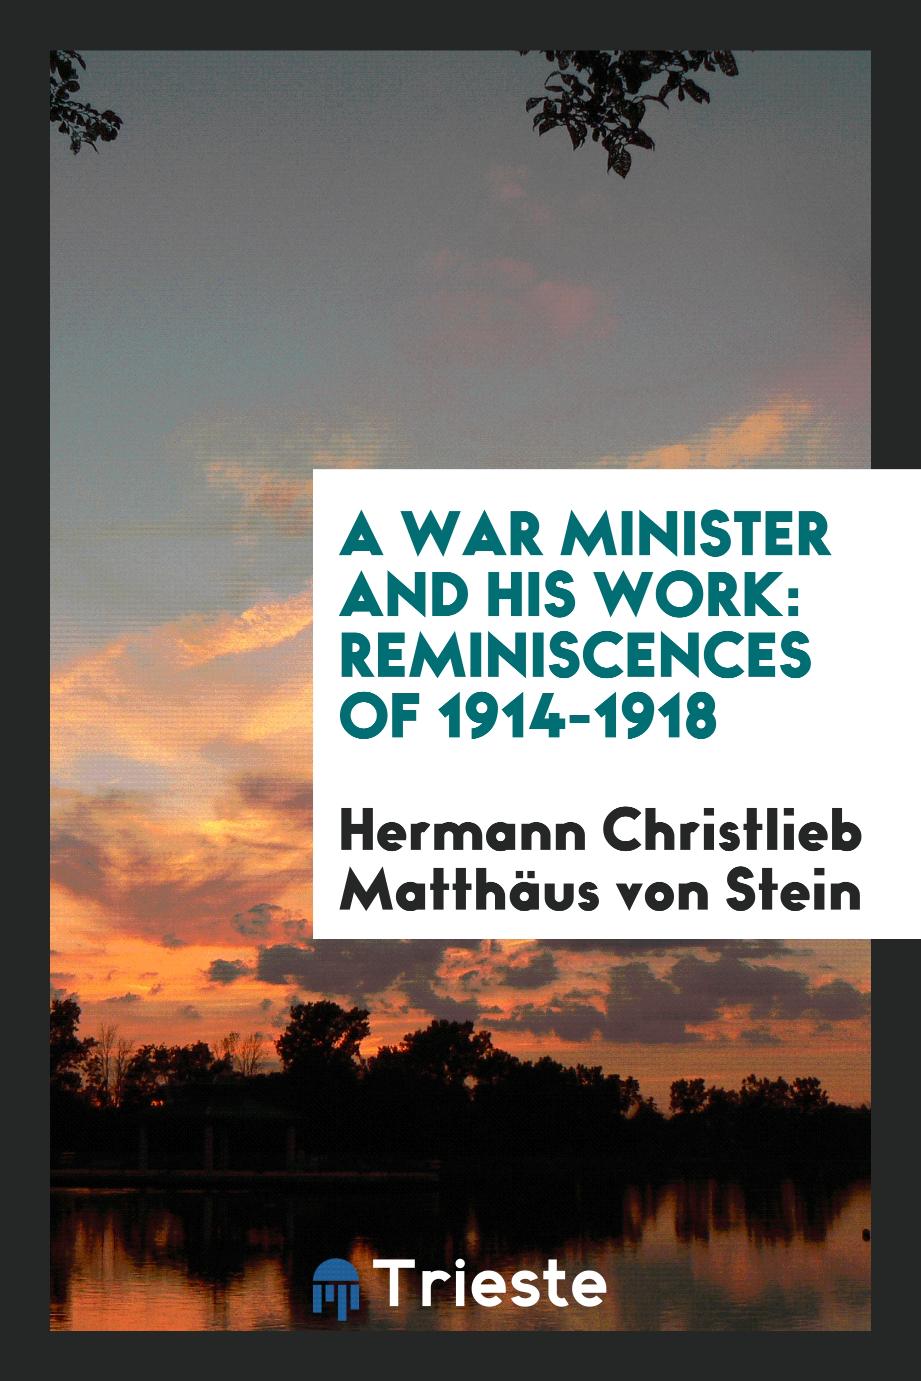 A war minister and his work: reminiscences of 1914-1918